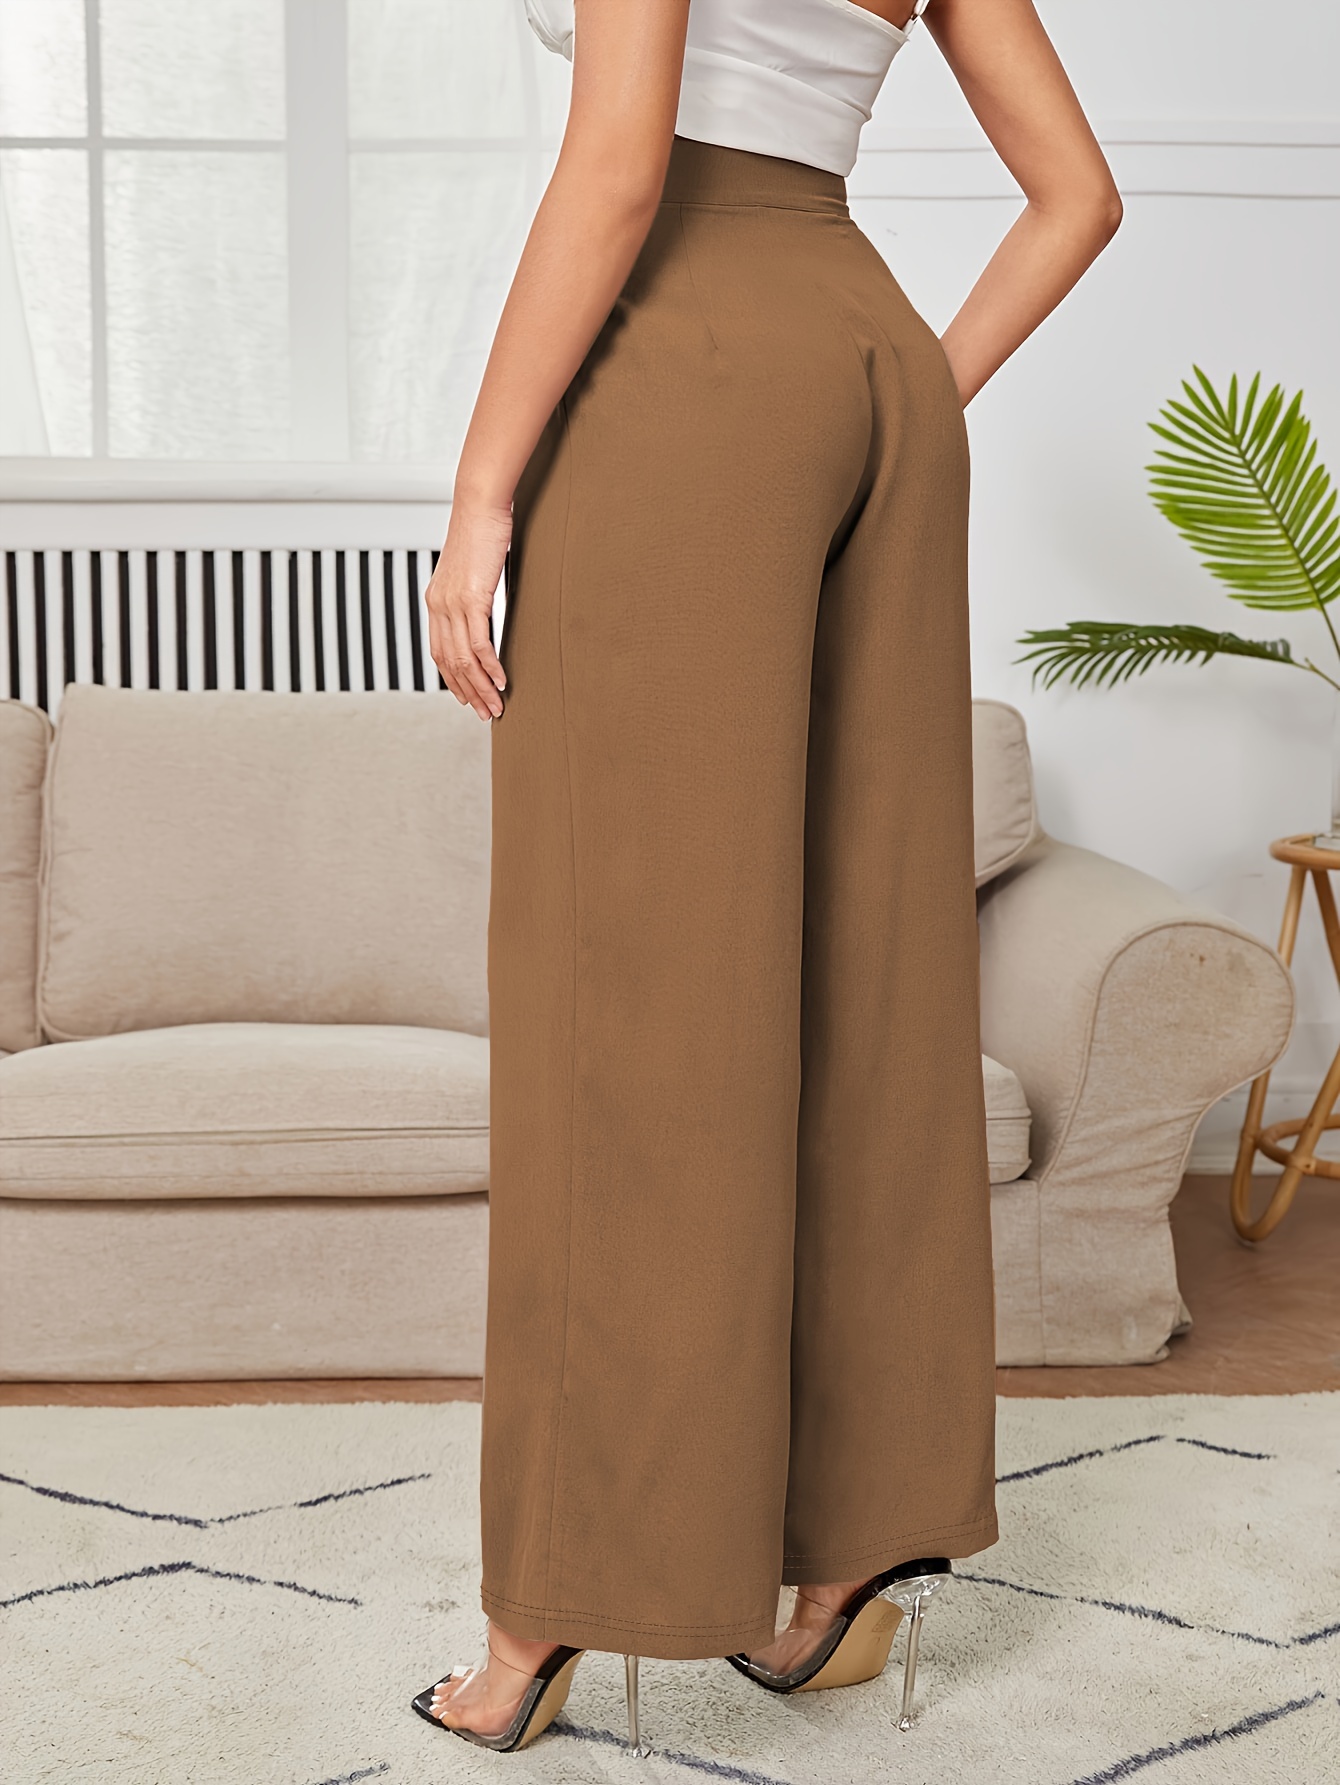 Style of the day: the elegant, high waisted pants